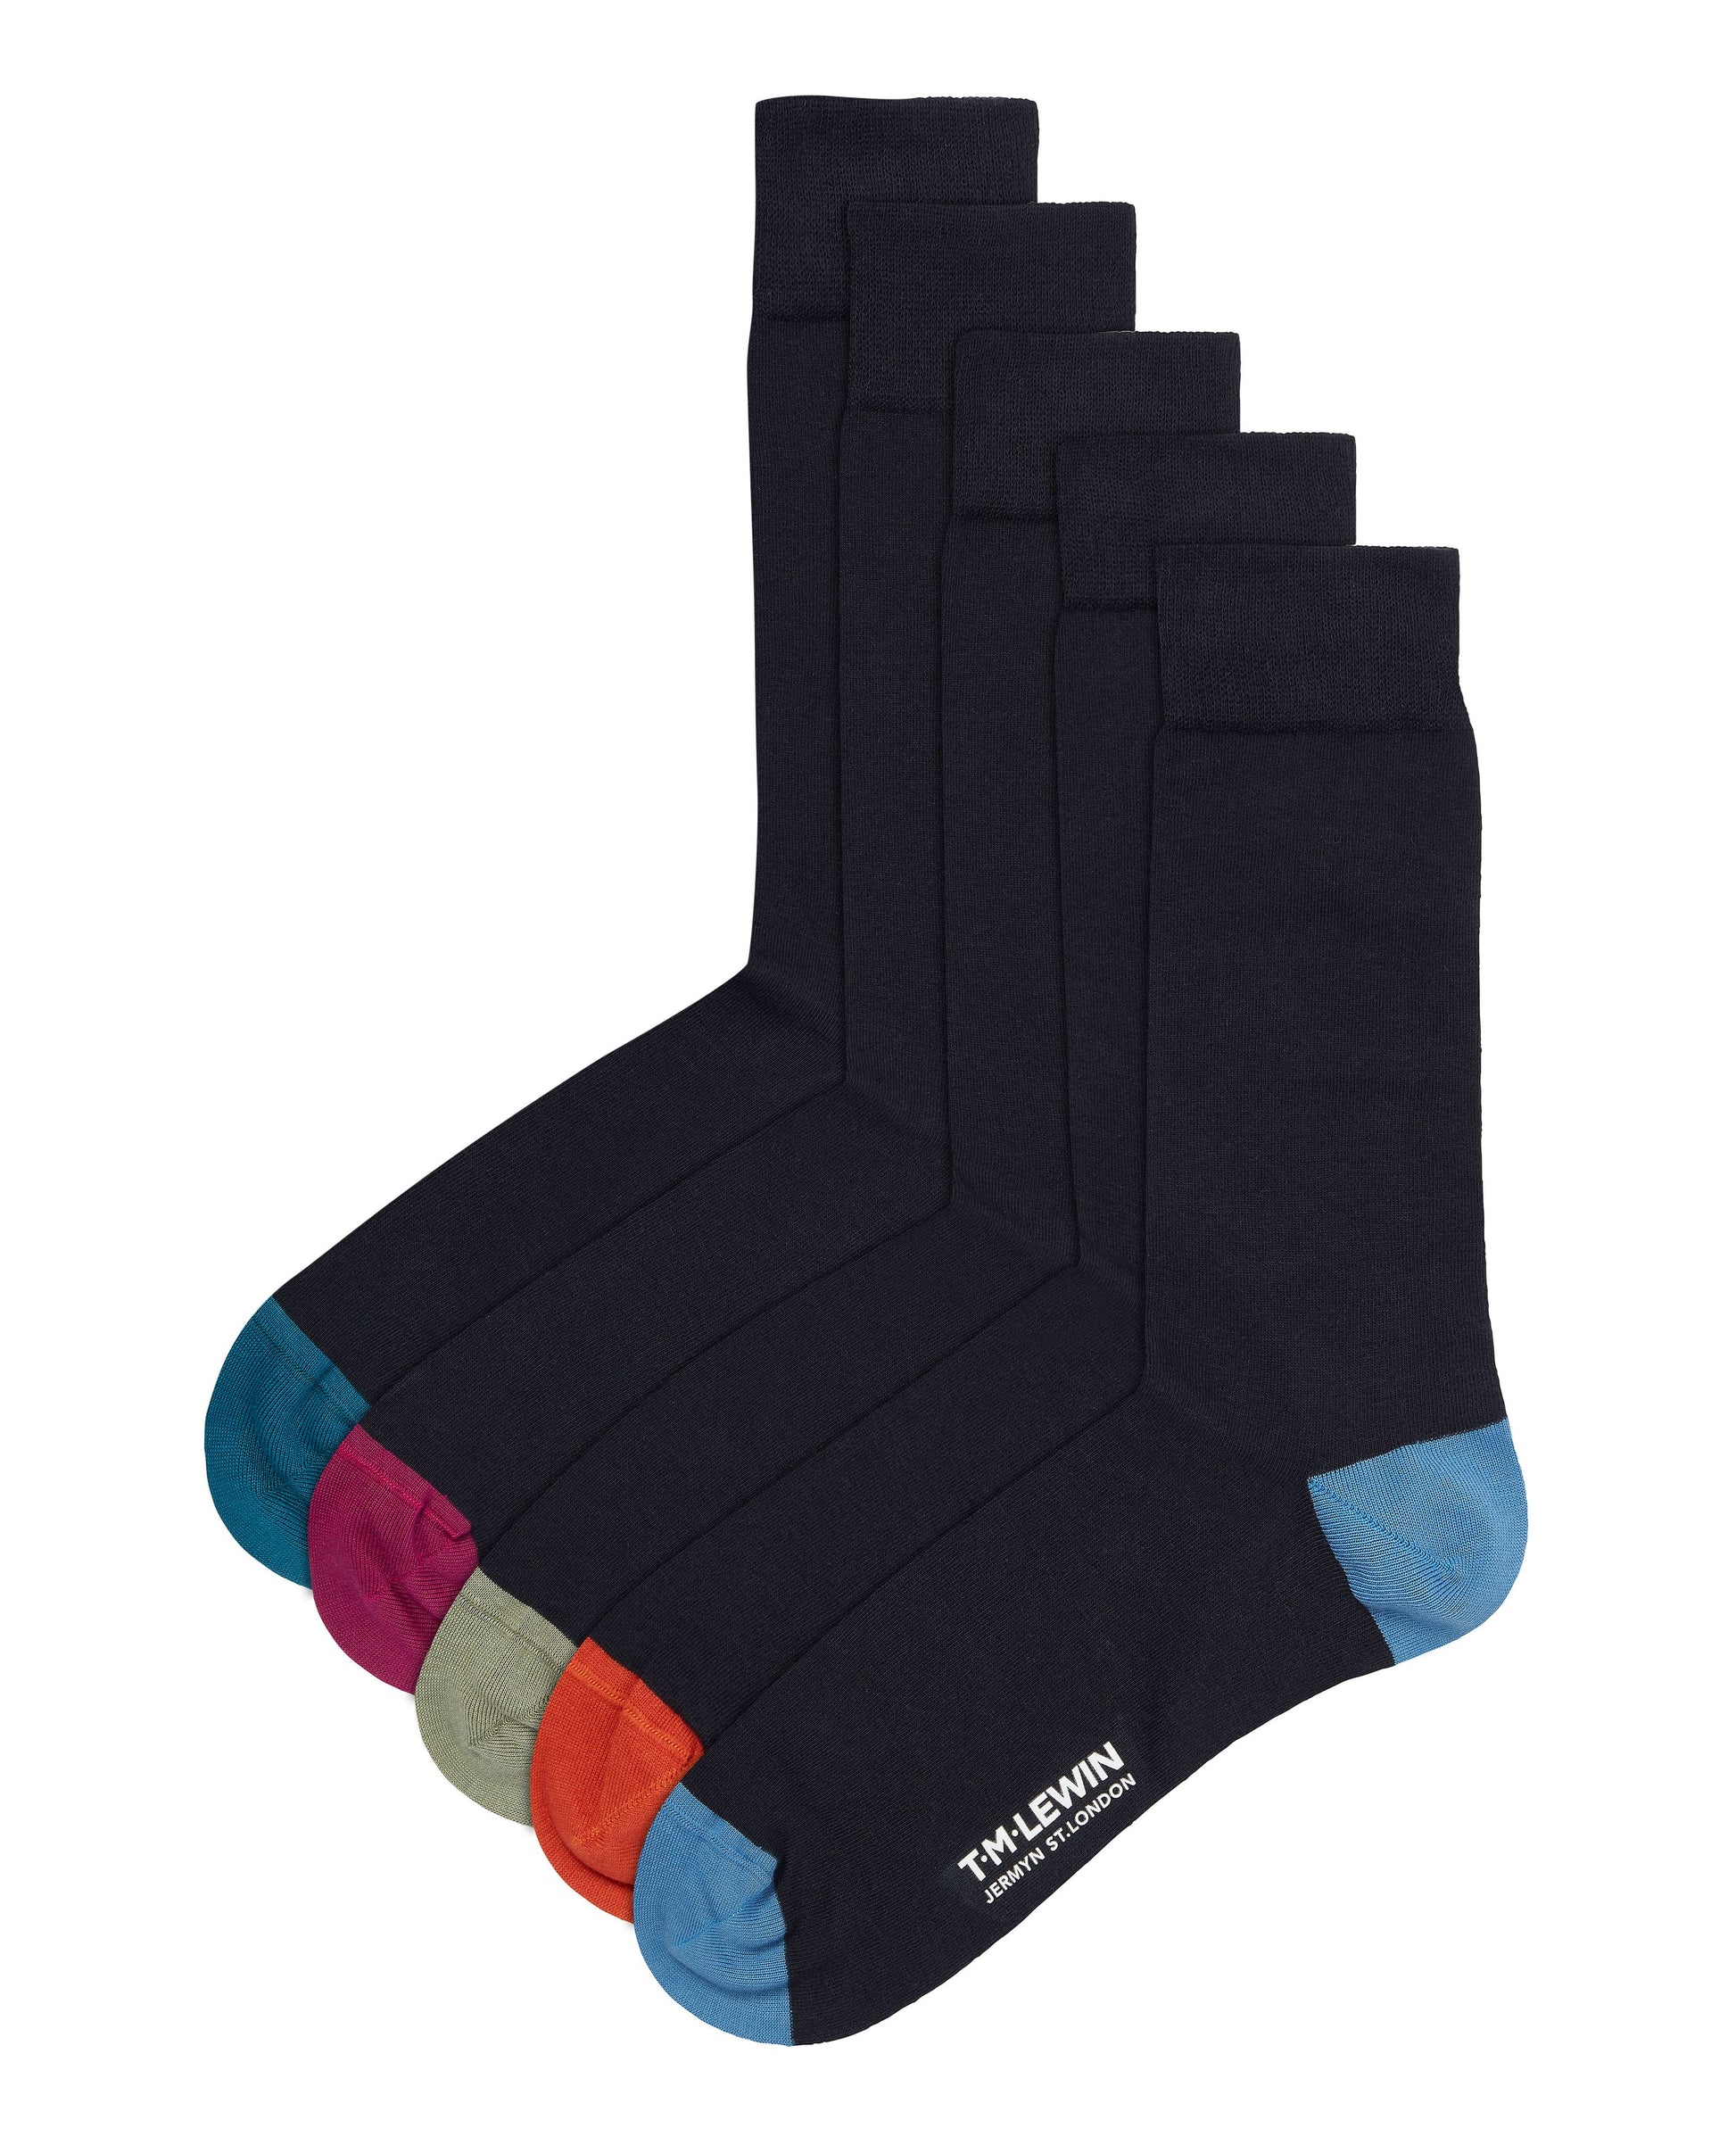 Image 1 of Navy Contrast Heel and Toe 5 Pack Sock Set